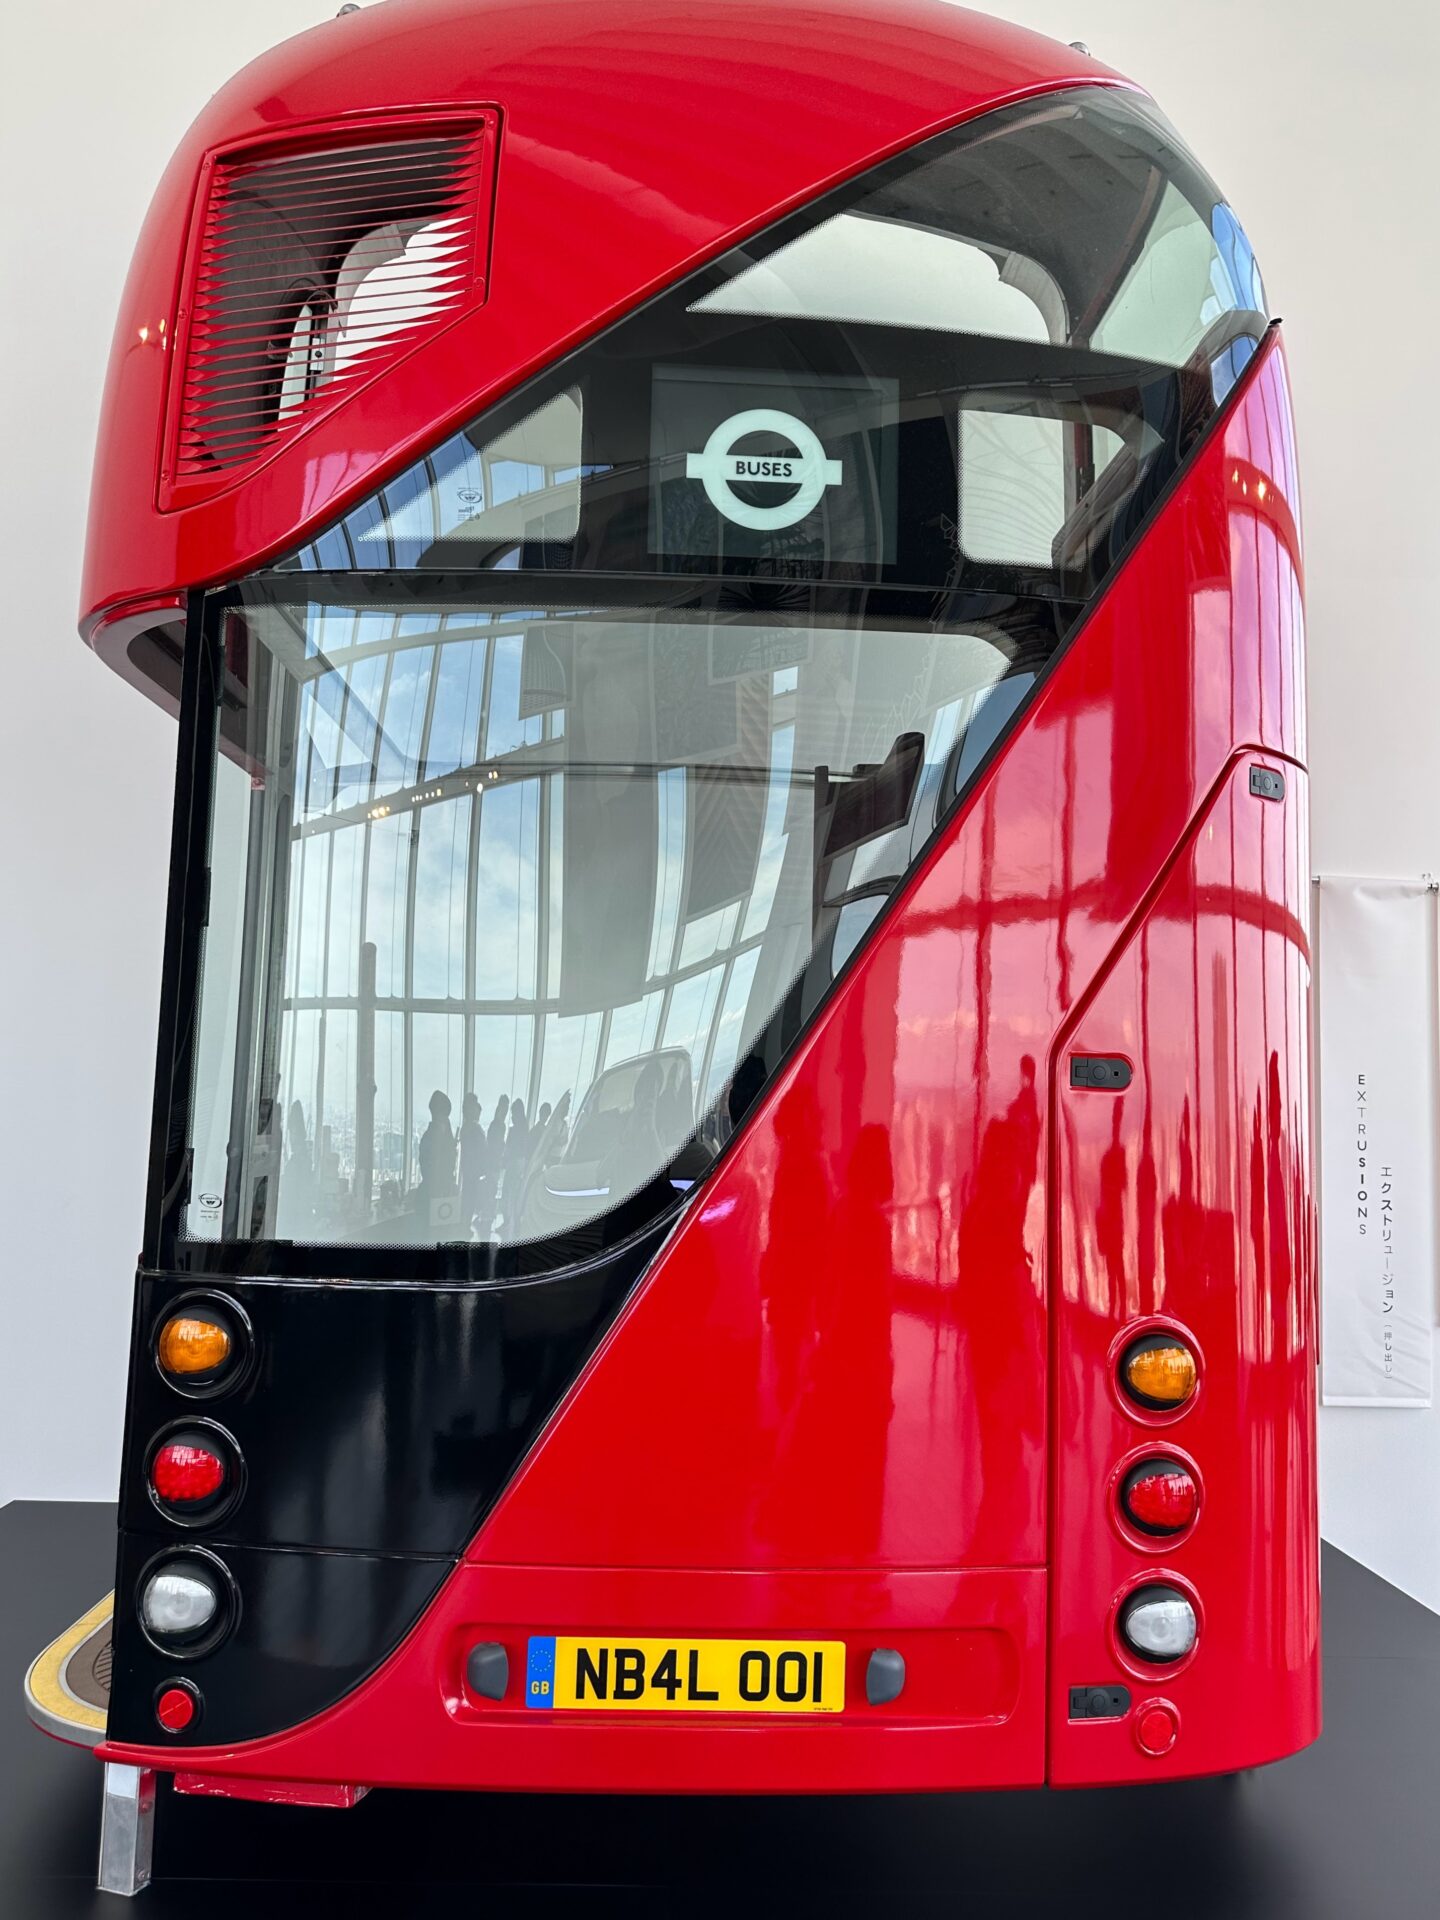 New Routemaster《新ルートマスター：市バス》